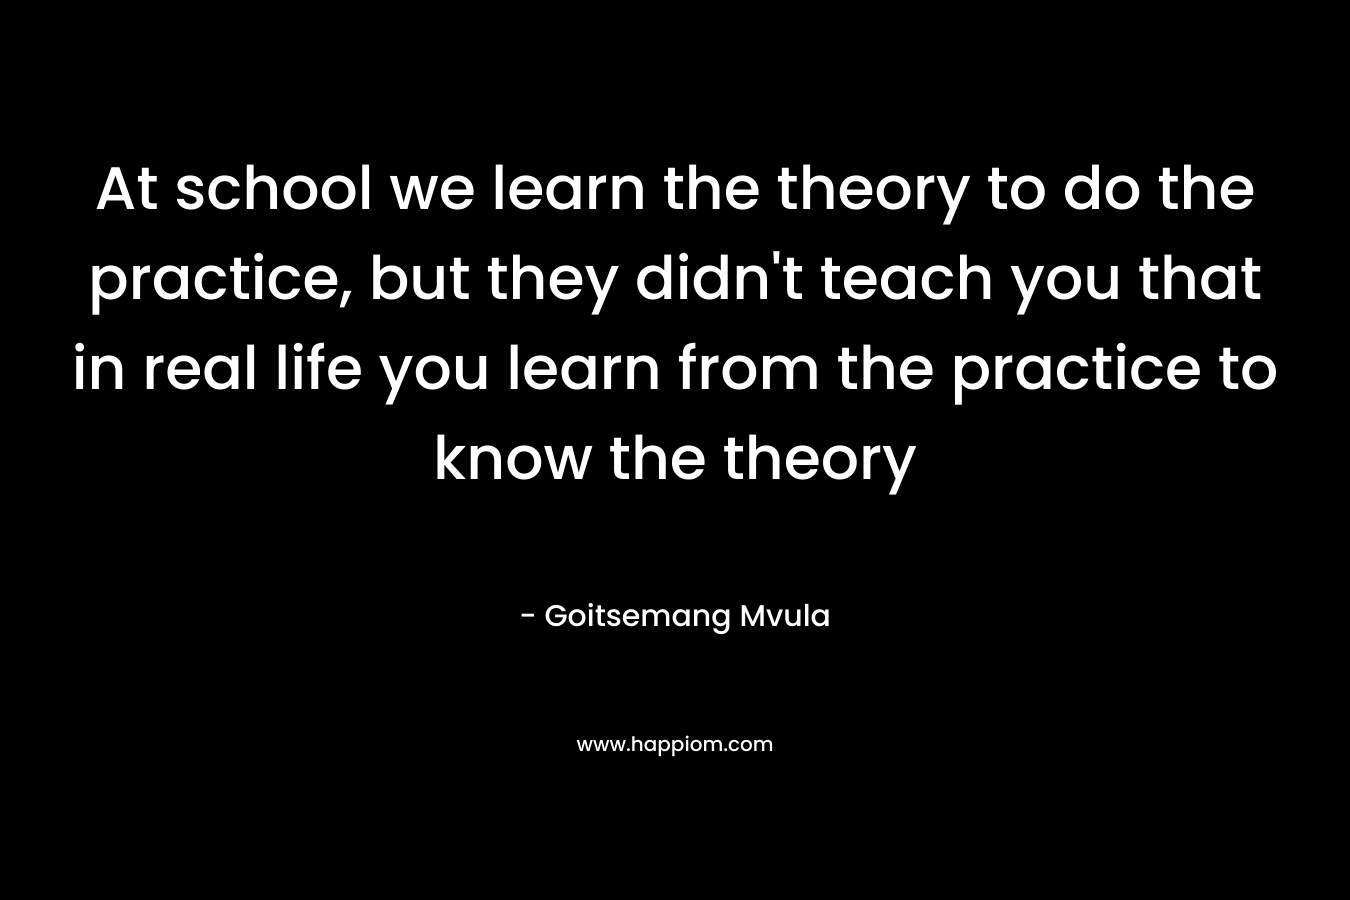 At school we learn the theory to do the practice, but they didn’t teach you that in real life you learn from the practice to know the theory – Goitsemang Mvula